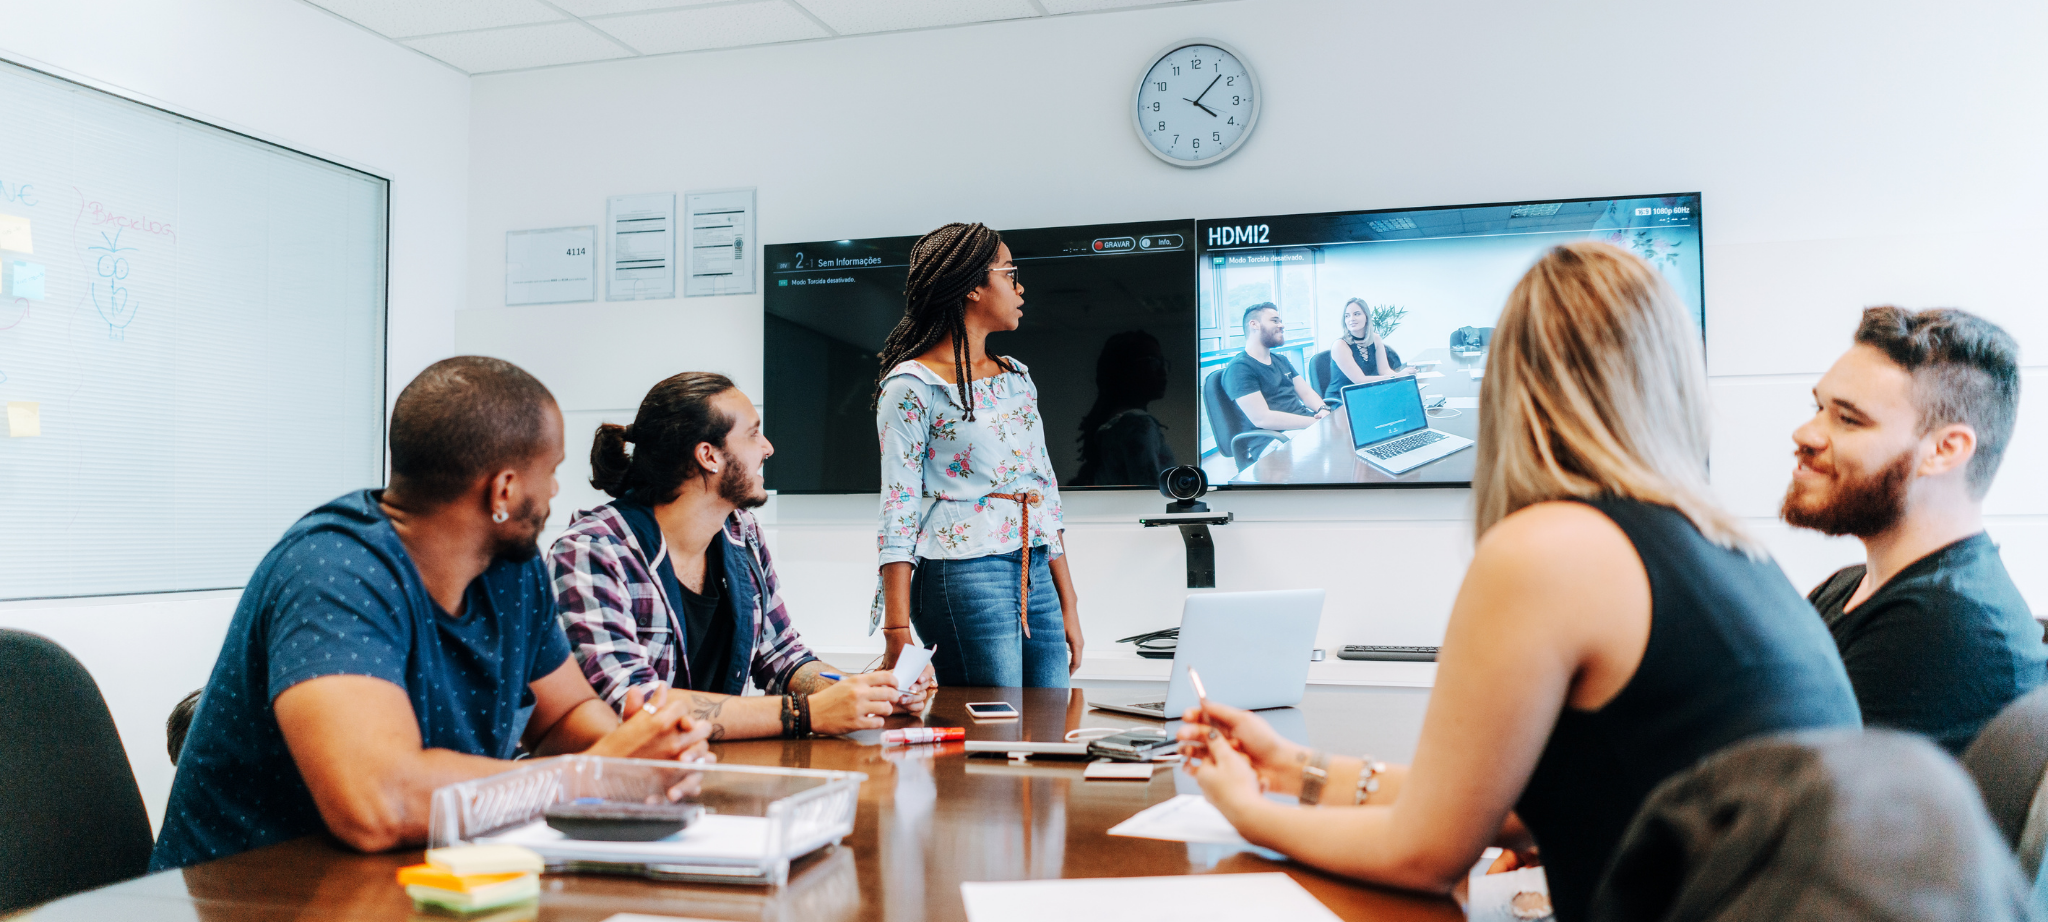 How has Video Conferencing Changed Business?